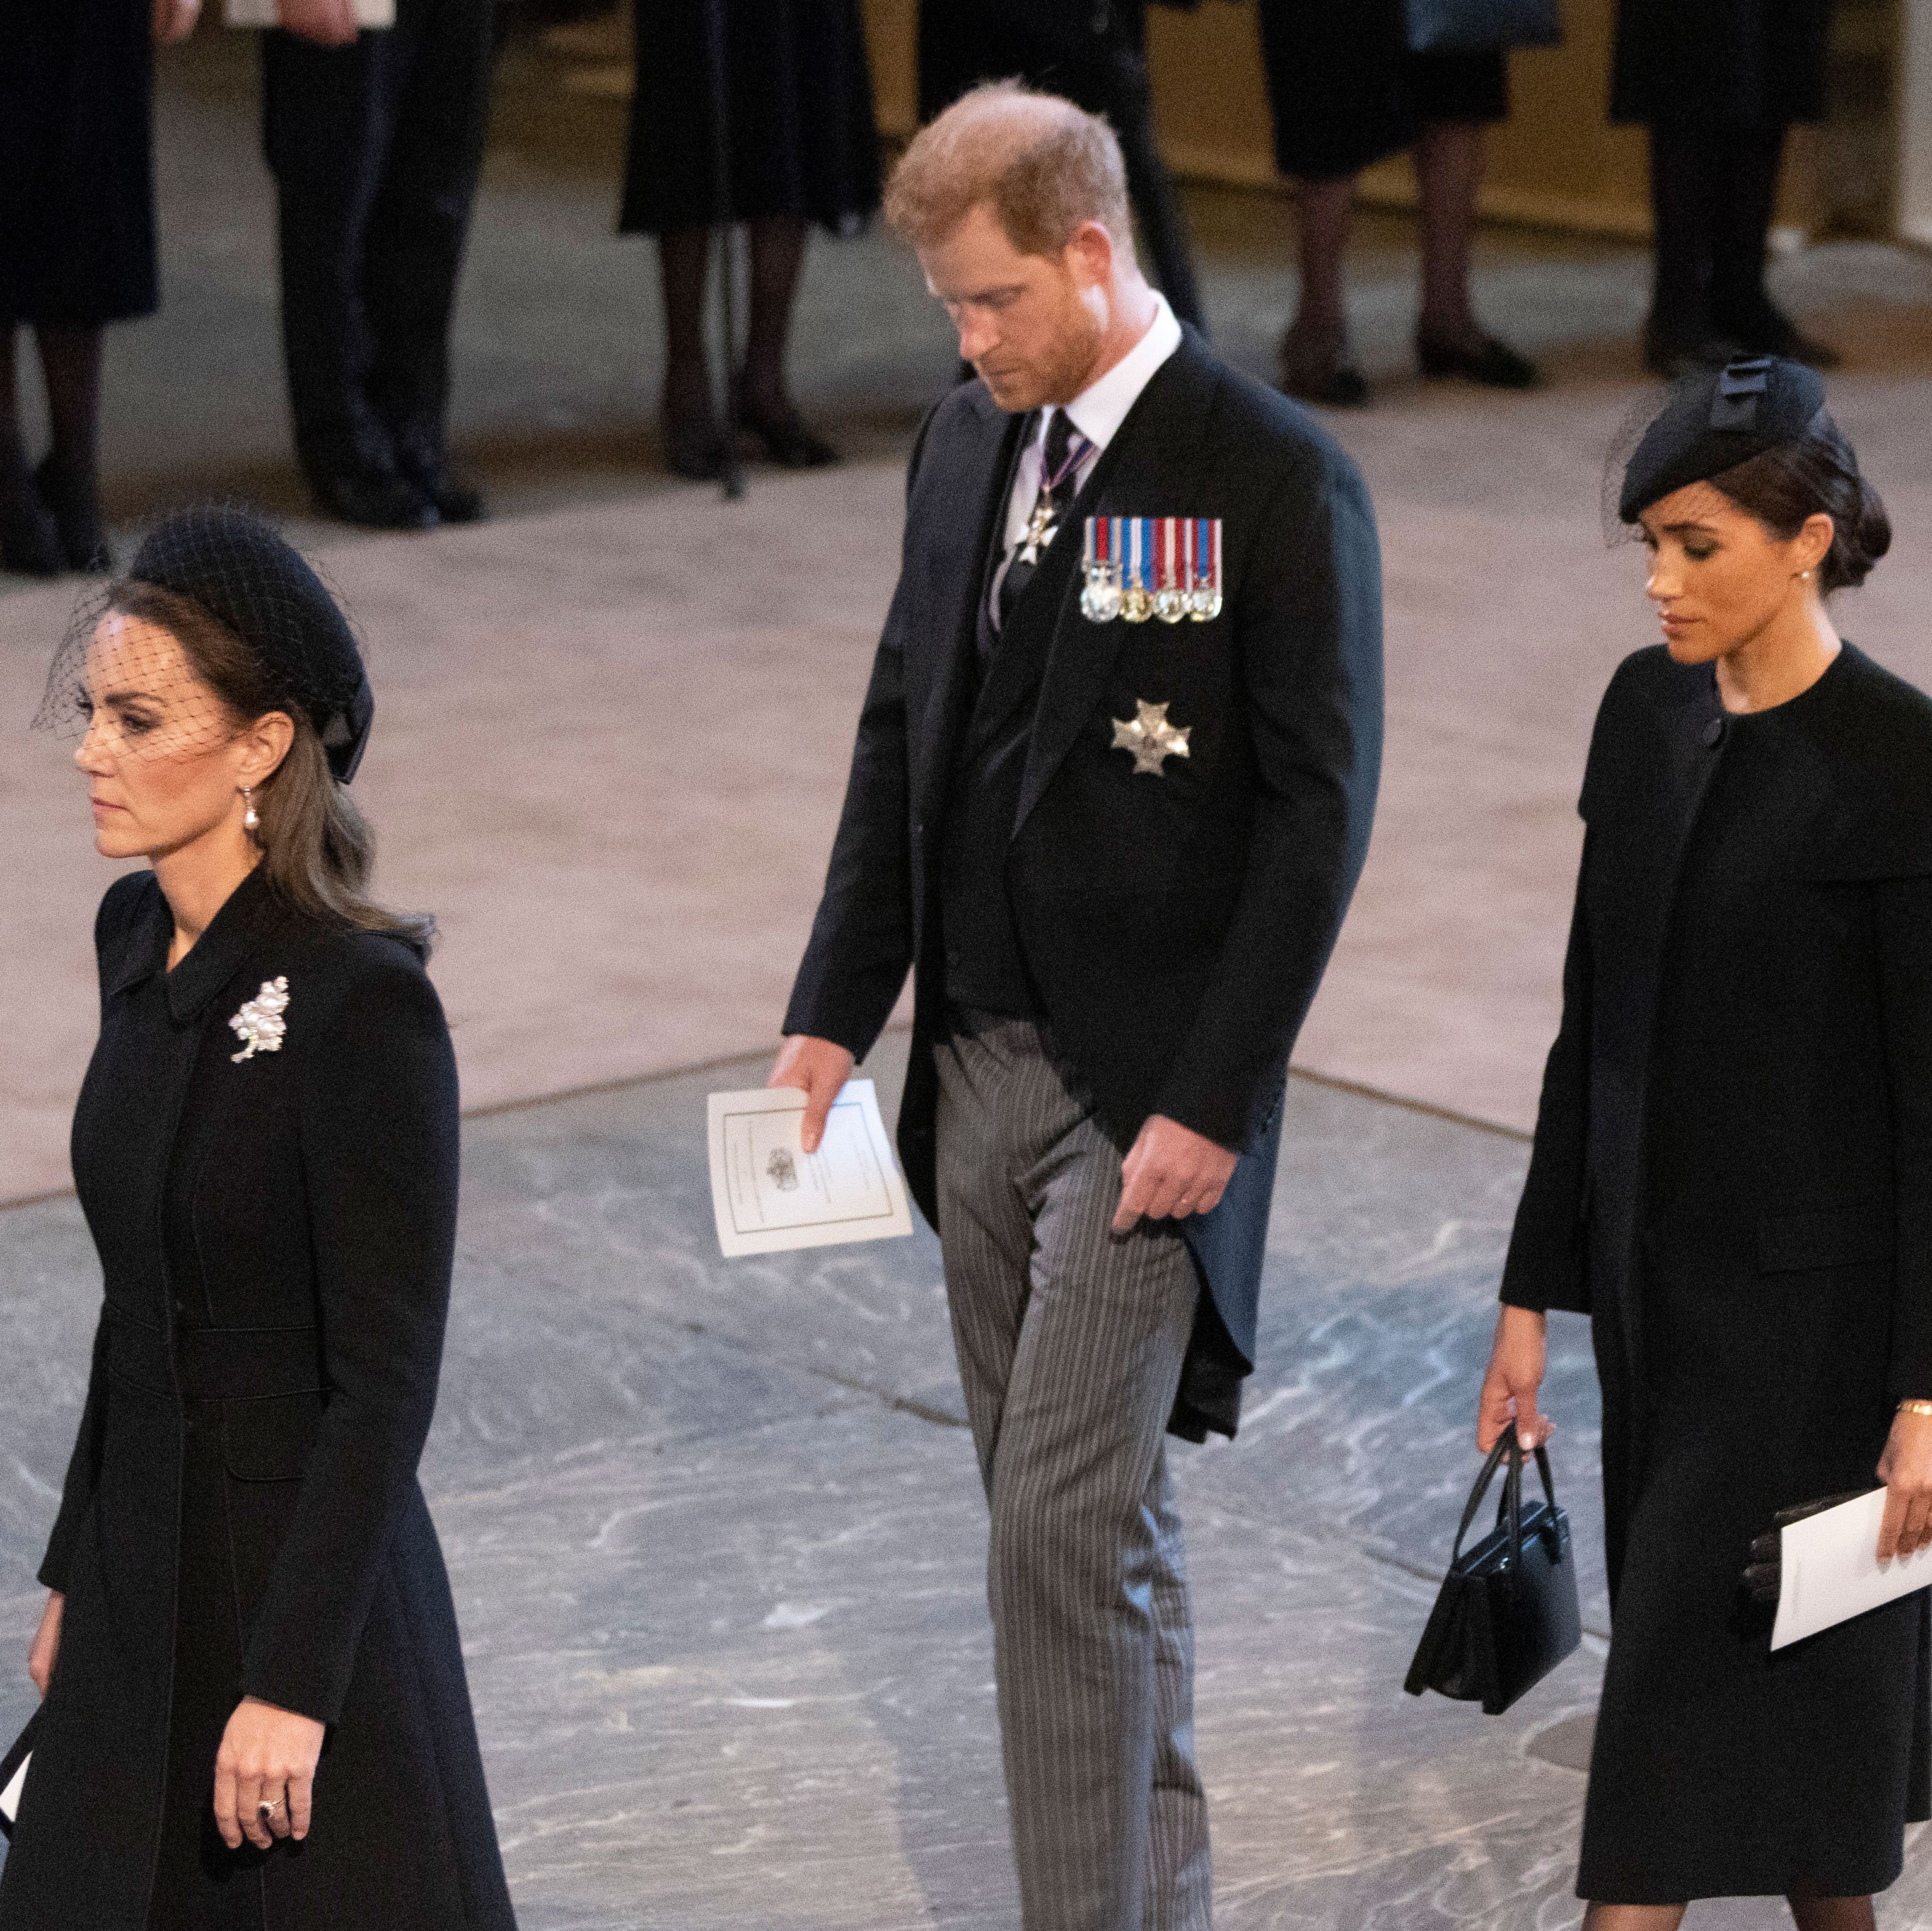 Kate Middleton and Meghan Markle Reportedly Didn't Talk to Each Other at All During the Queen's Funeral Events